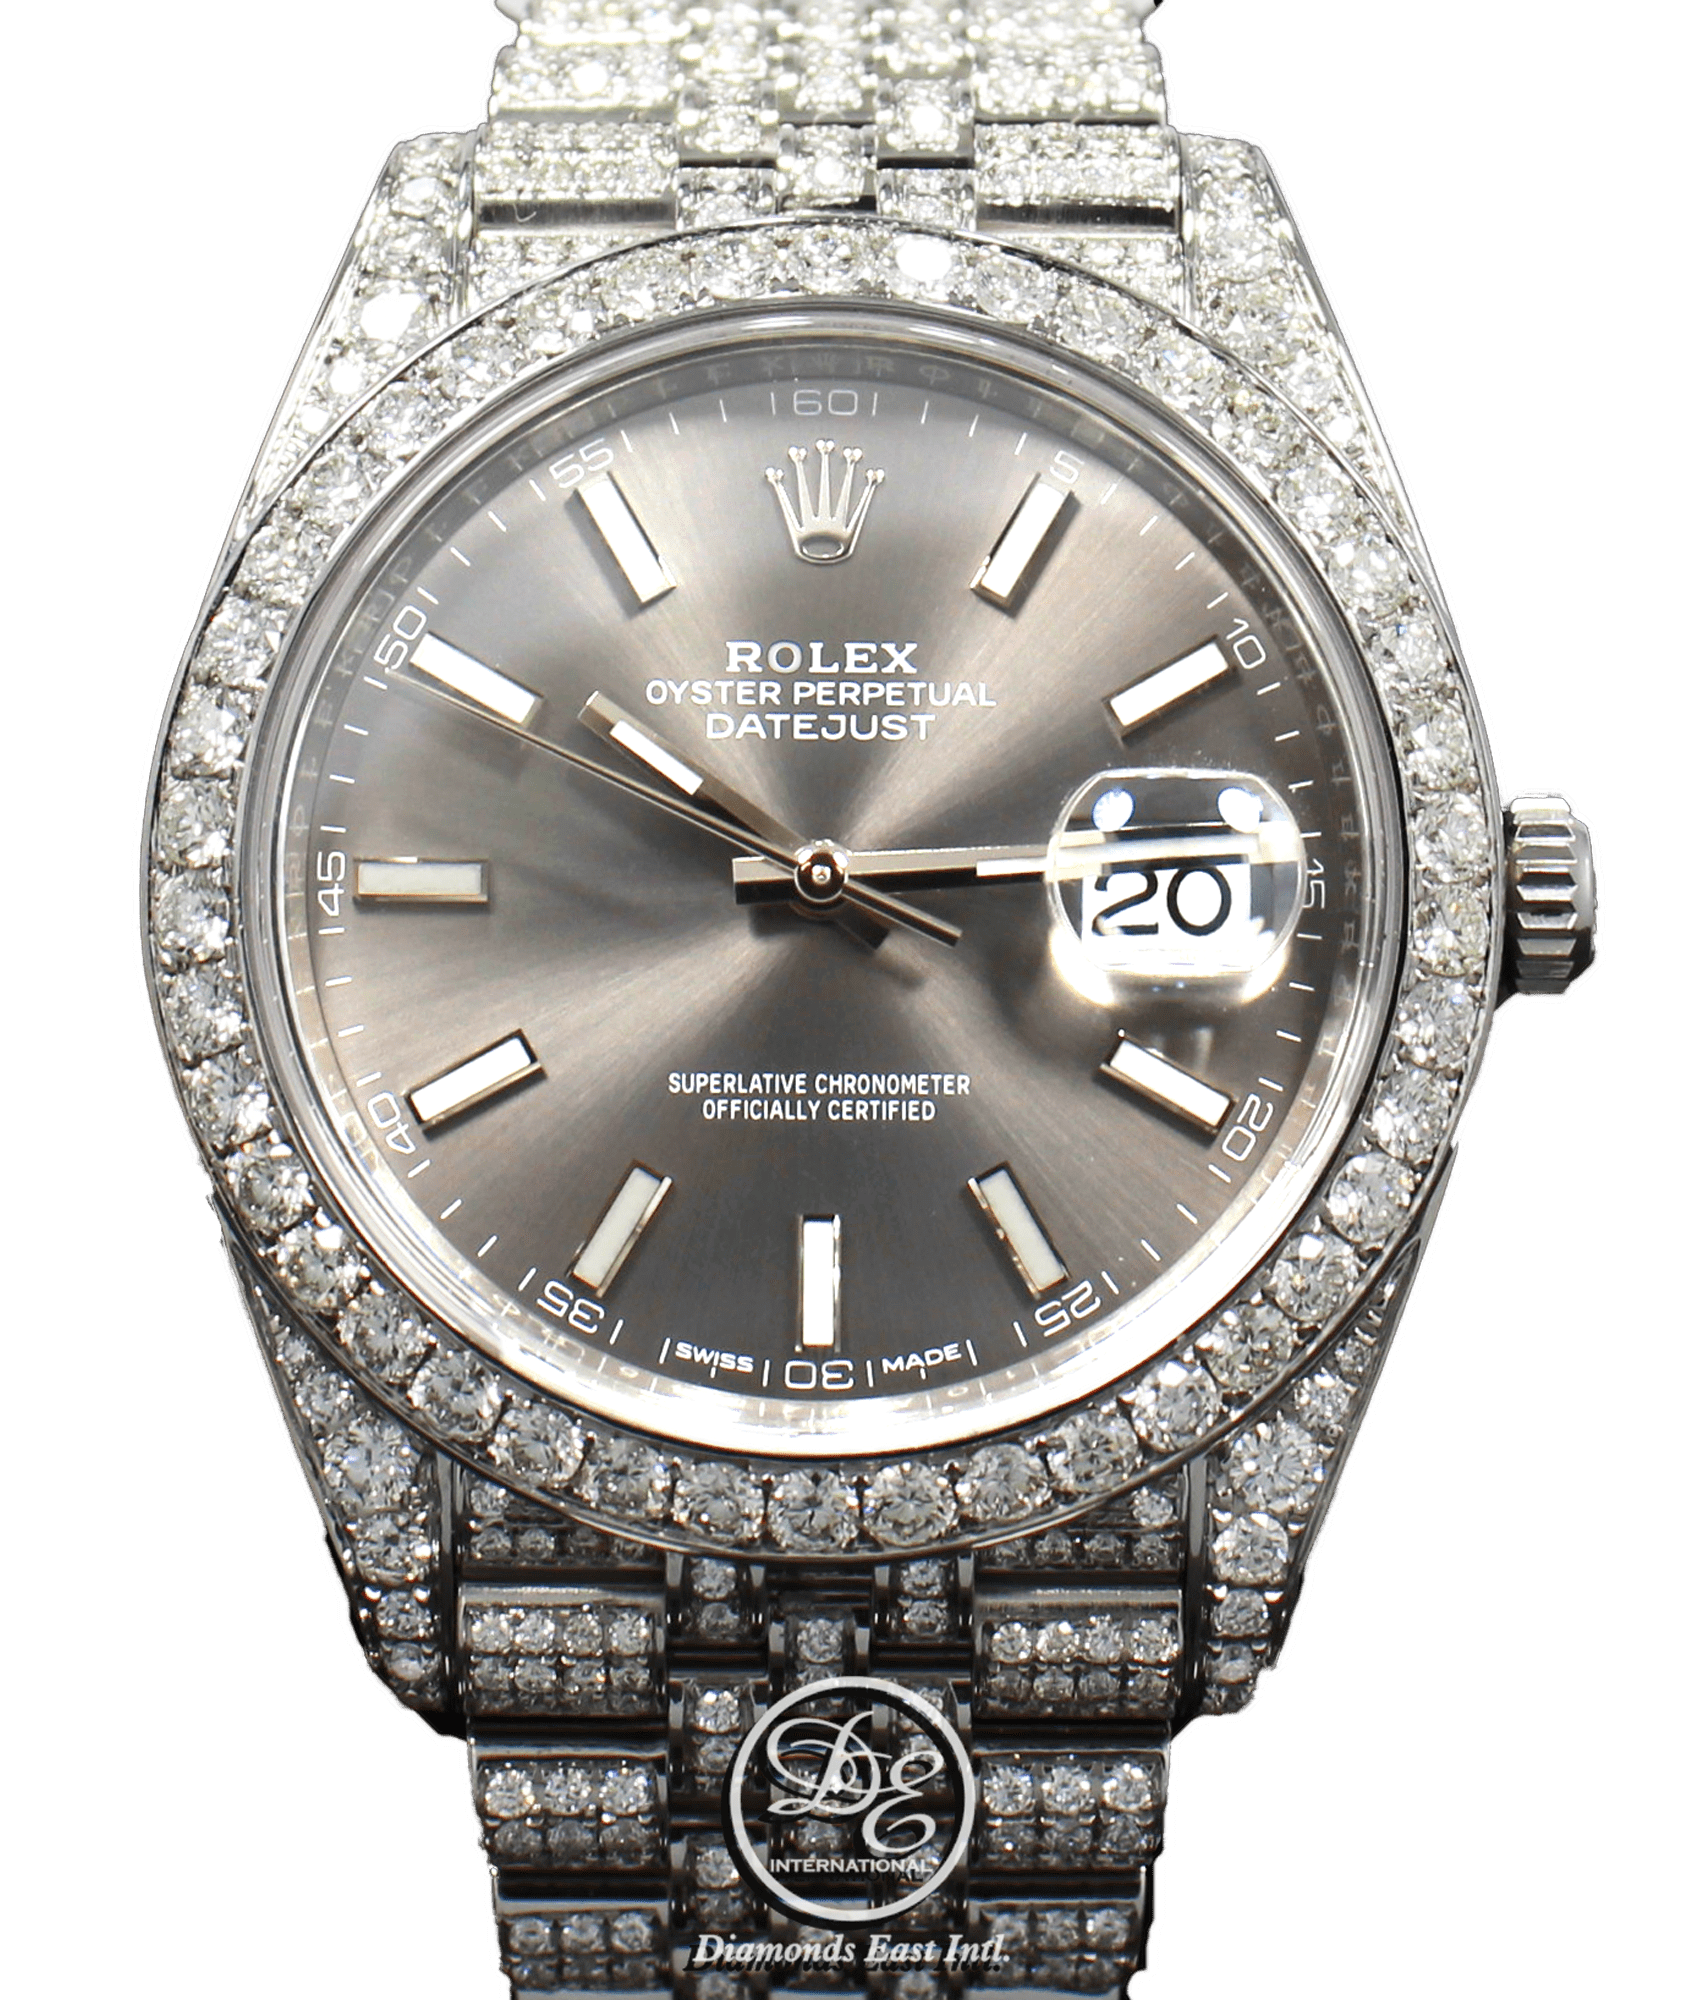 Rolex Datejust Iced Out Diamond Watch